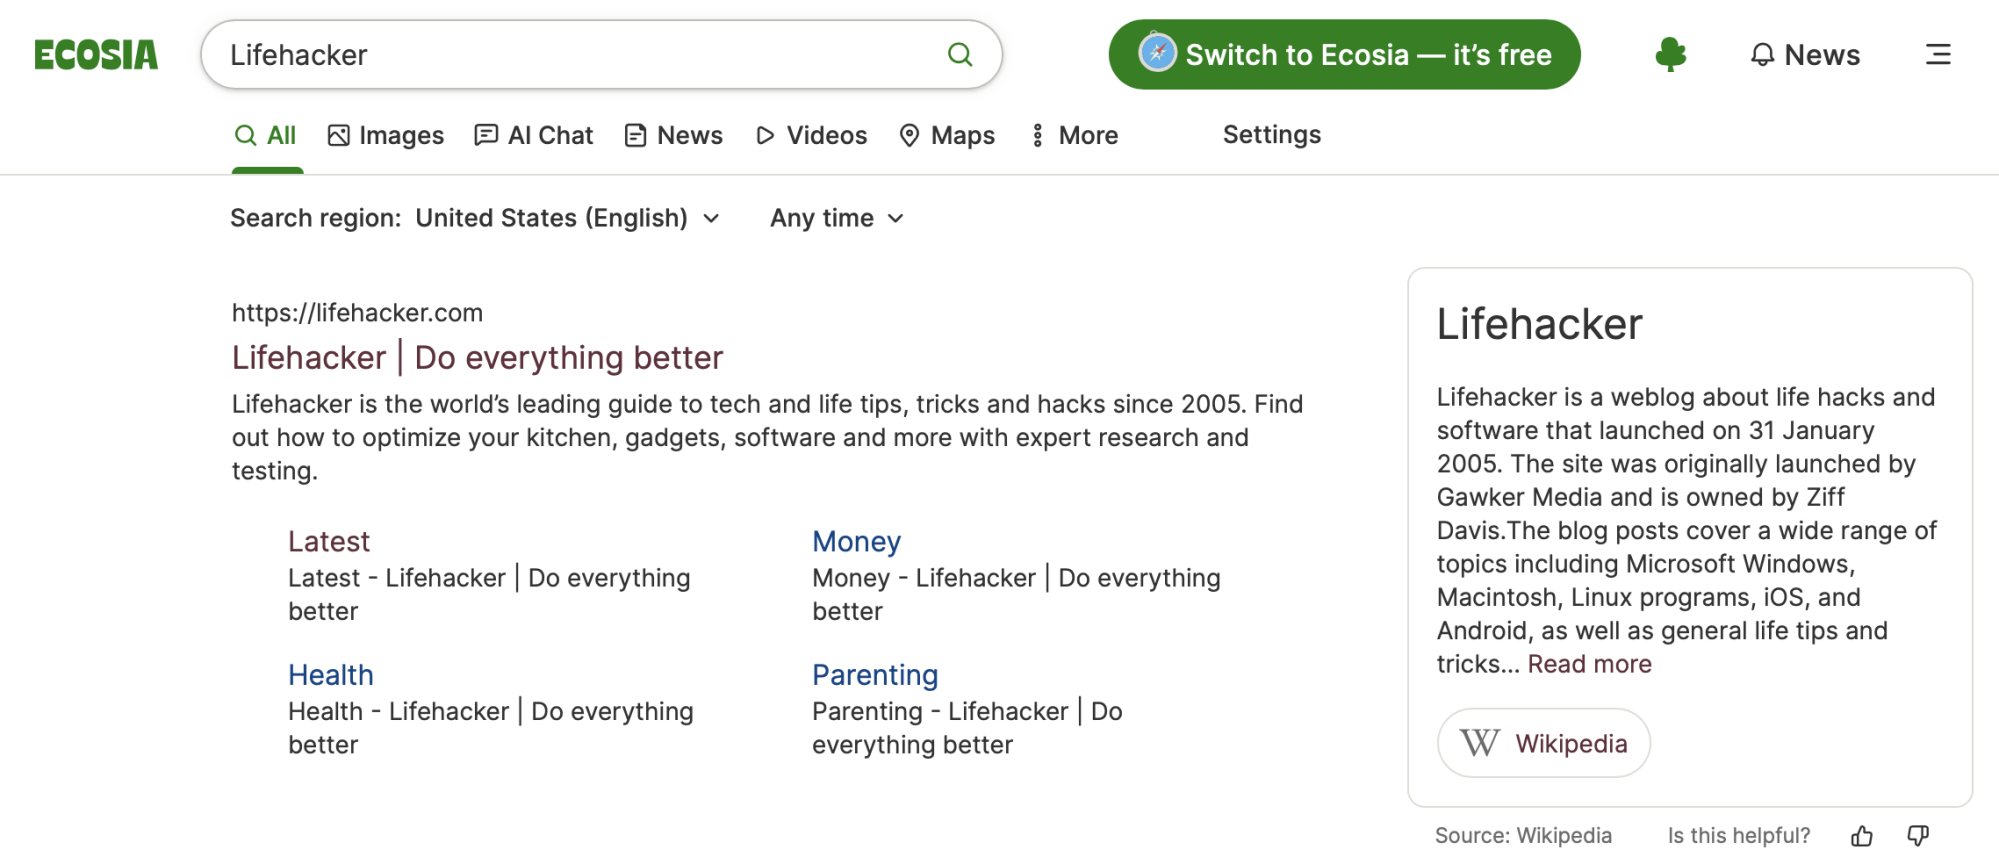 An Ecosia search for the word "Lifehacker"